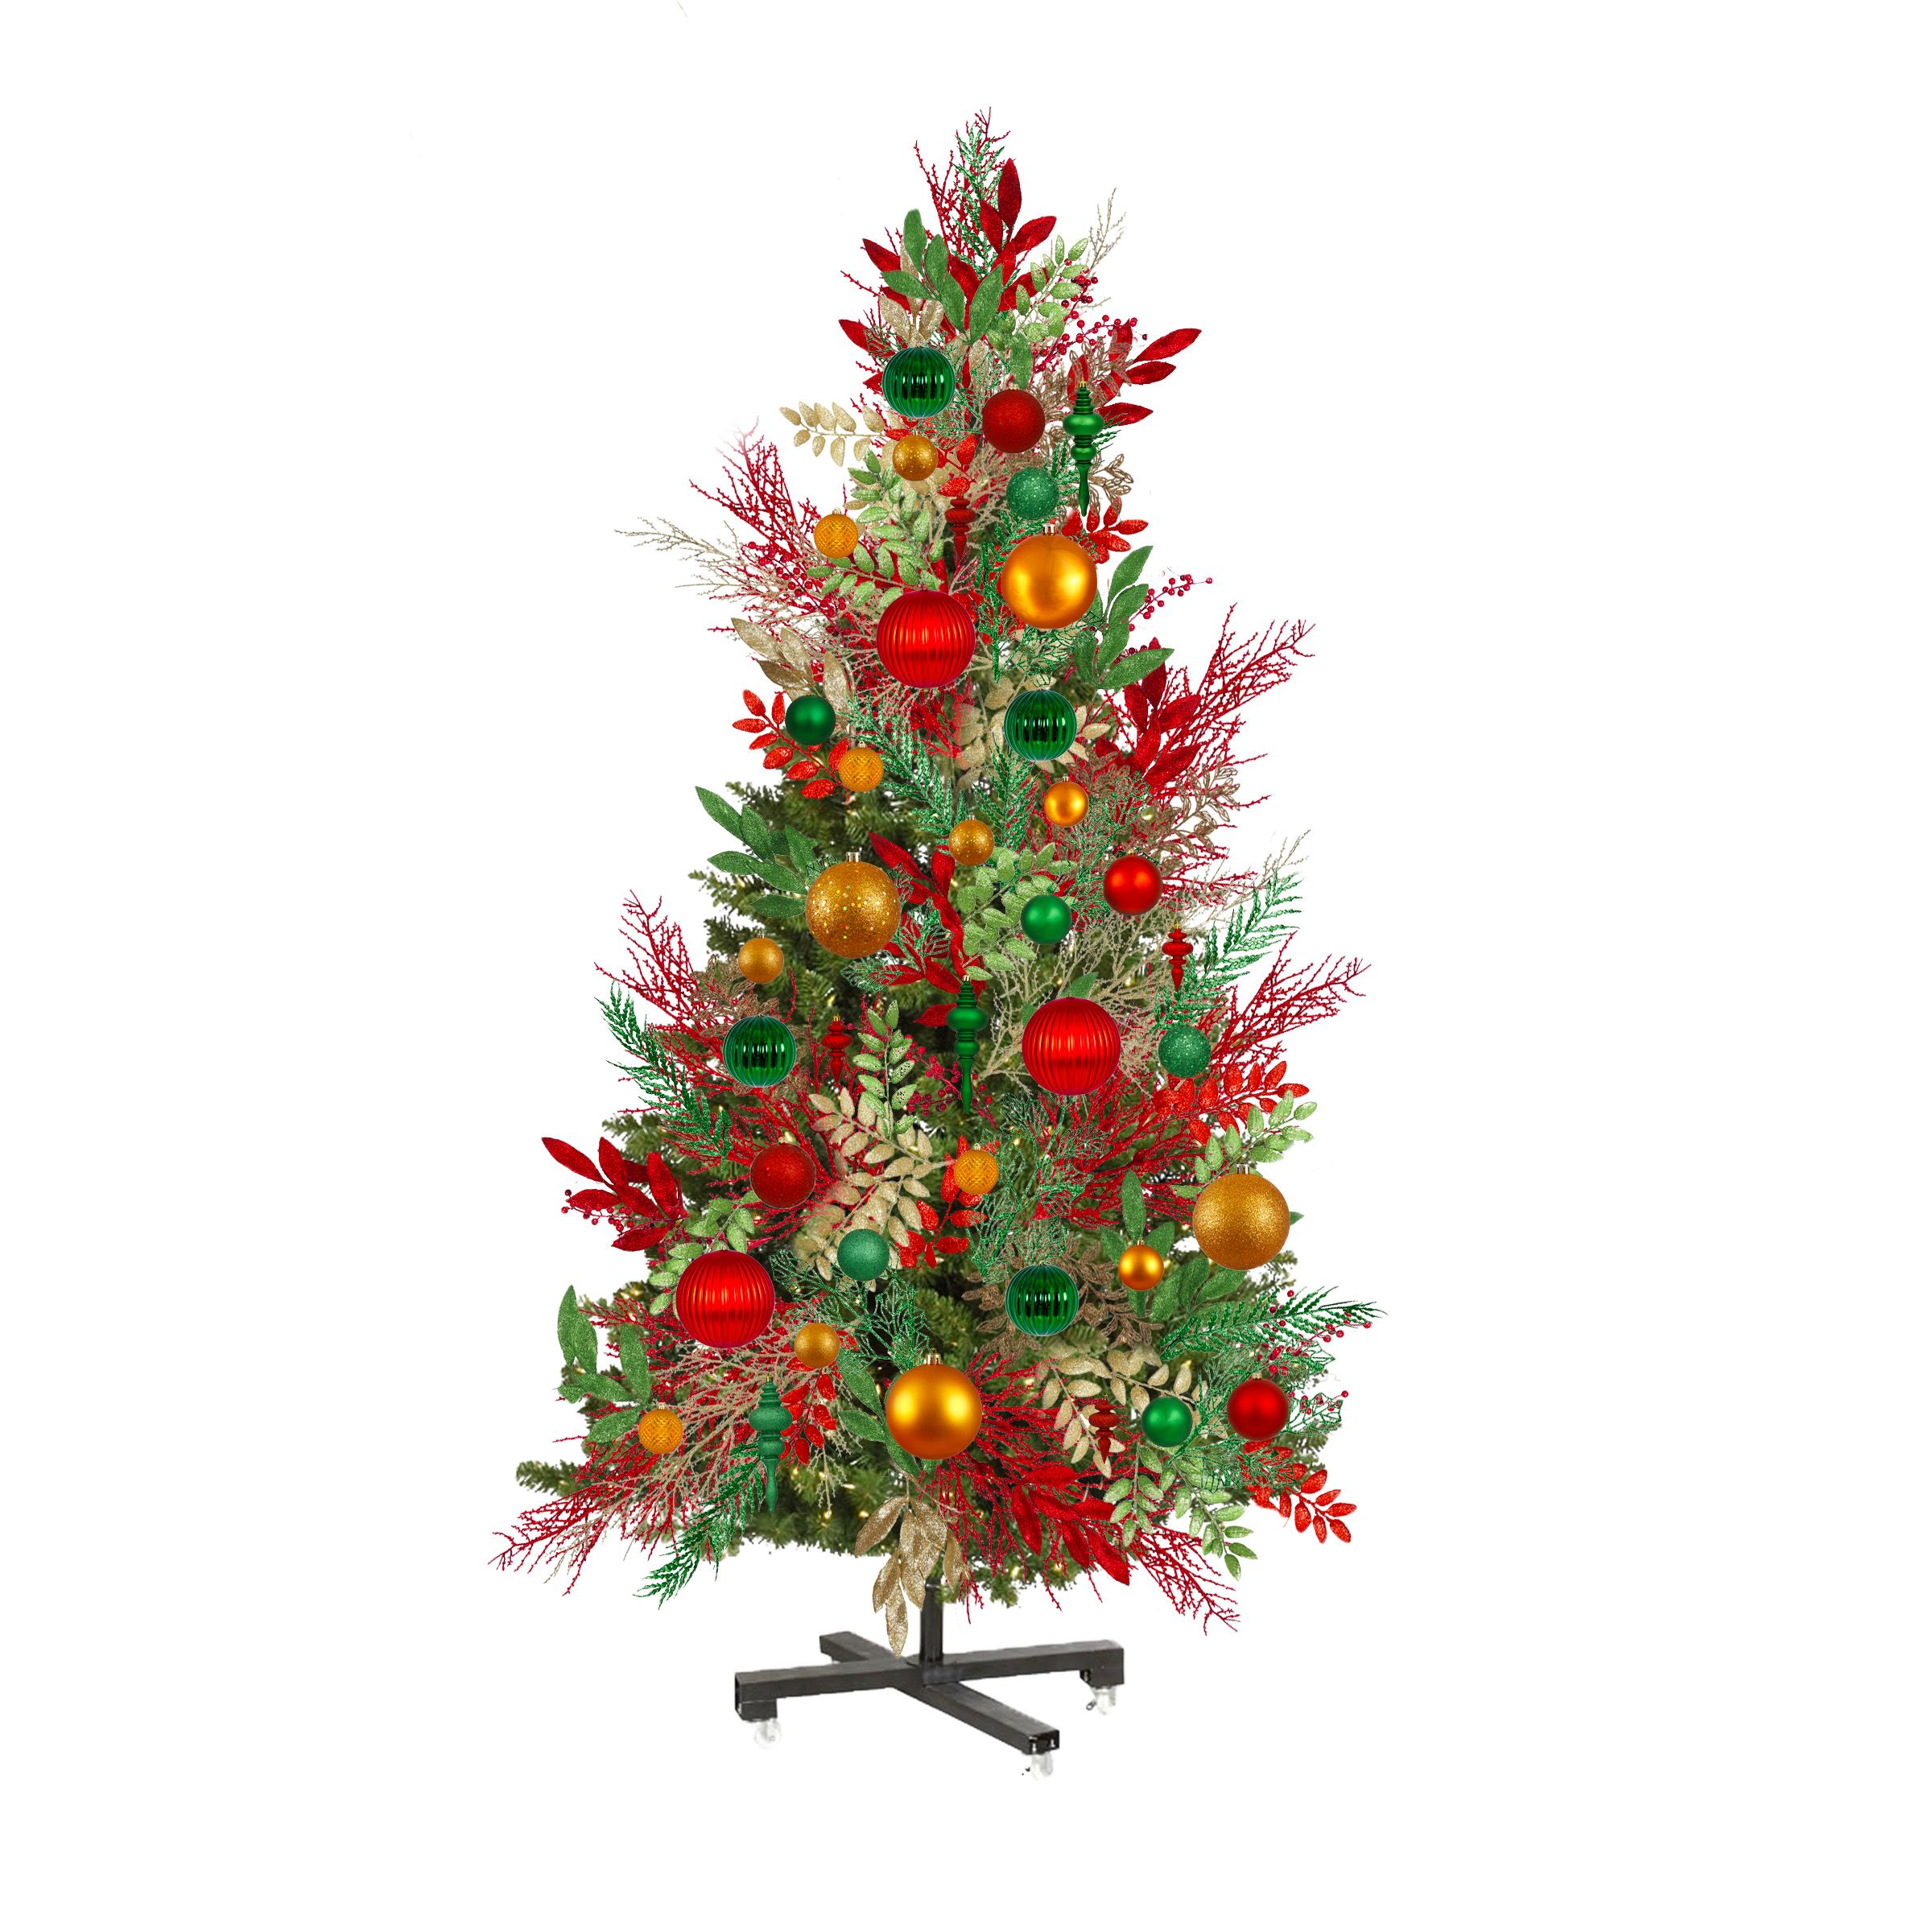 Mistletoe Magic - A gold, green, and red Christmas tree